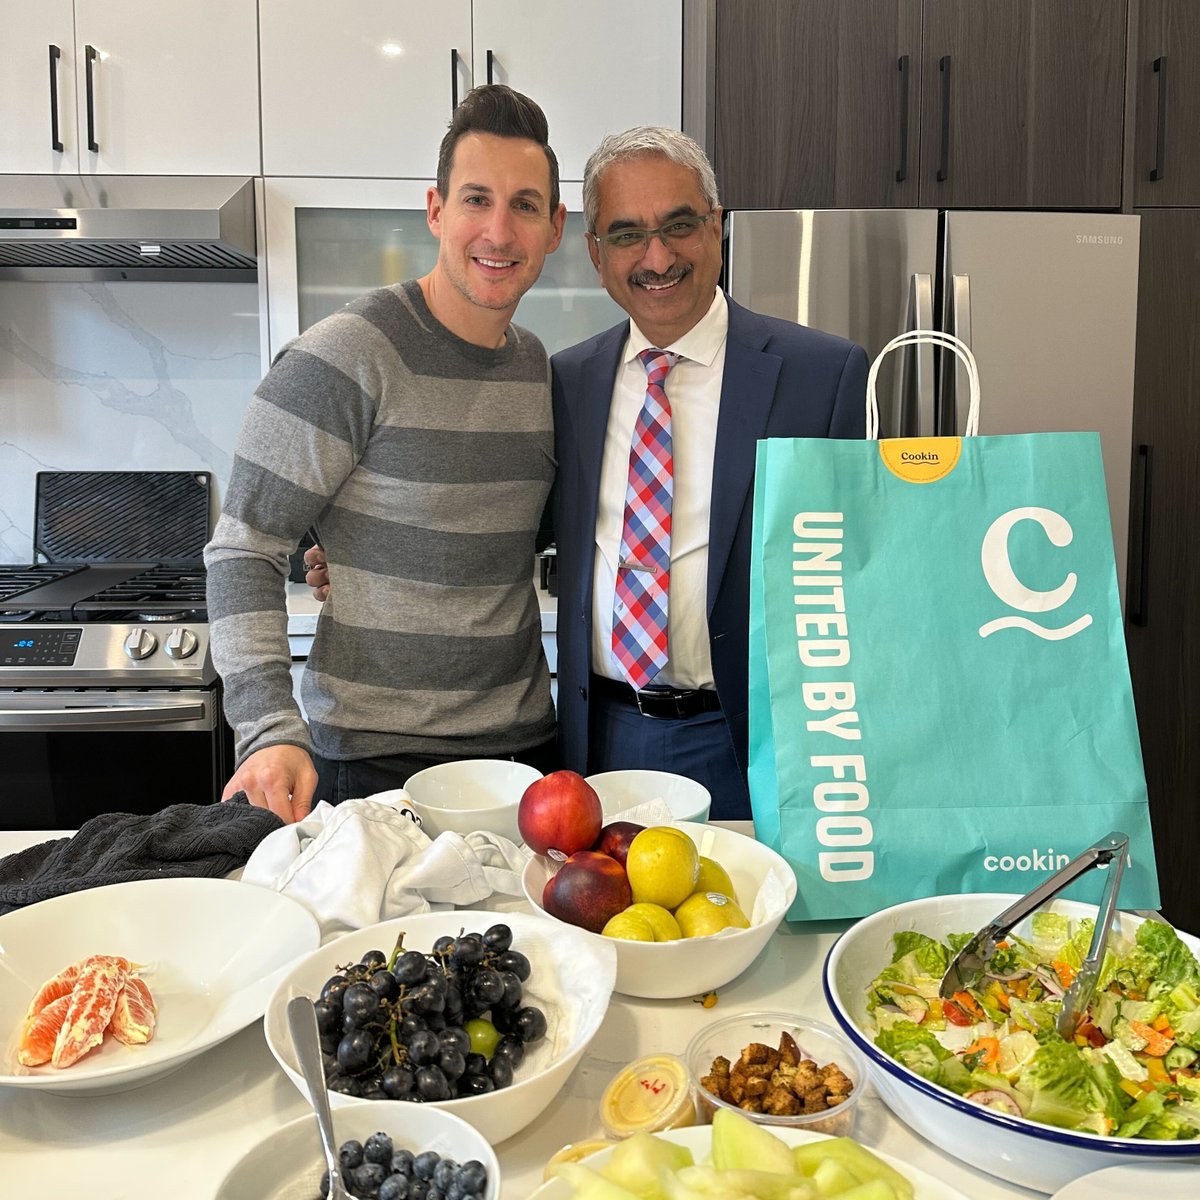 We were honoured to welcome @JagBadwal, Ontario Agent General to Cookin HQ. 

As we expand our homemade marketplace throughout the United States we appreciate Jag’s support of Ontario companies growing south of the border. 

#TorontoTech #FoodTech #UnitedByFood